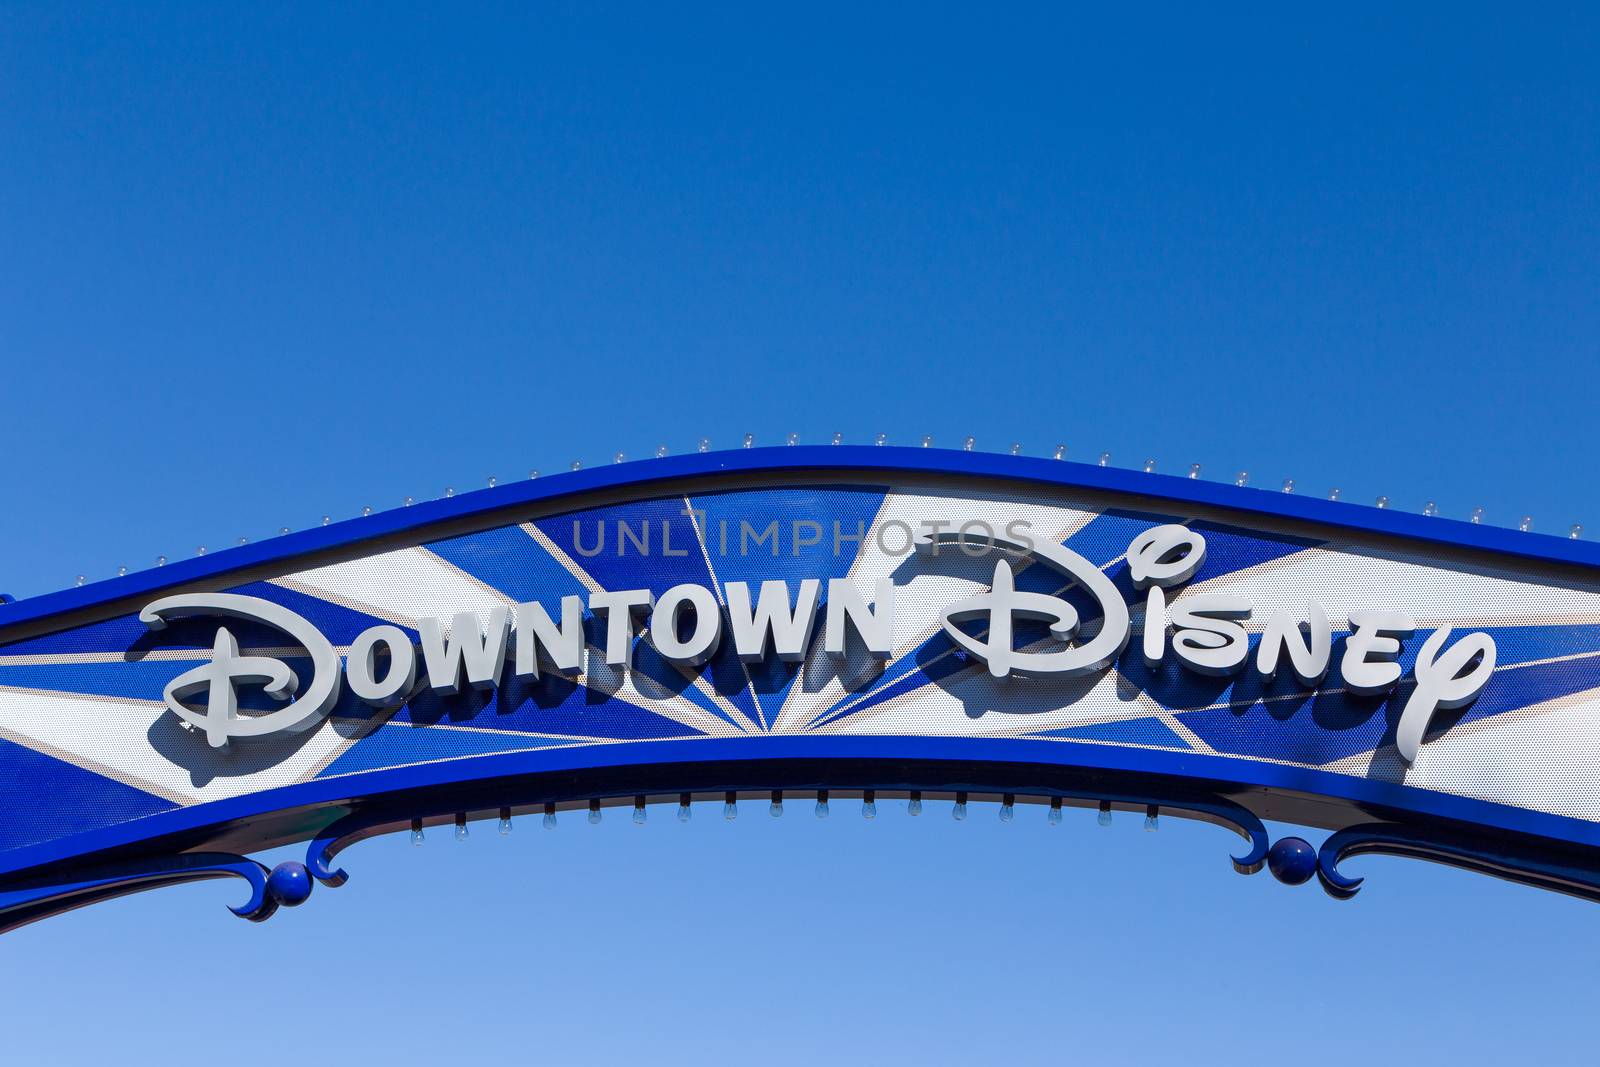 ANAHEIM, CA/USA - OCTOBER 10, 2015: Downtown Disney entrance sign. Downtown Disney is the name of an outdoor shopping, dining, and entertainment complex next to Disneyland.